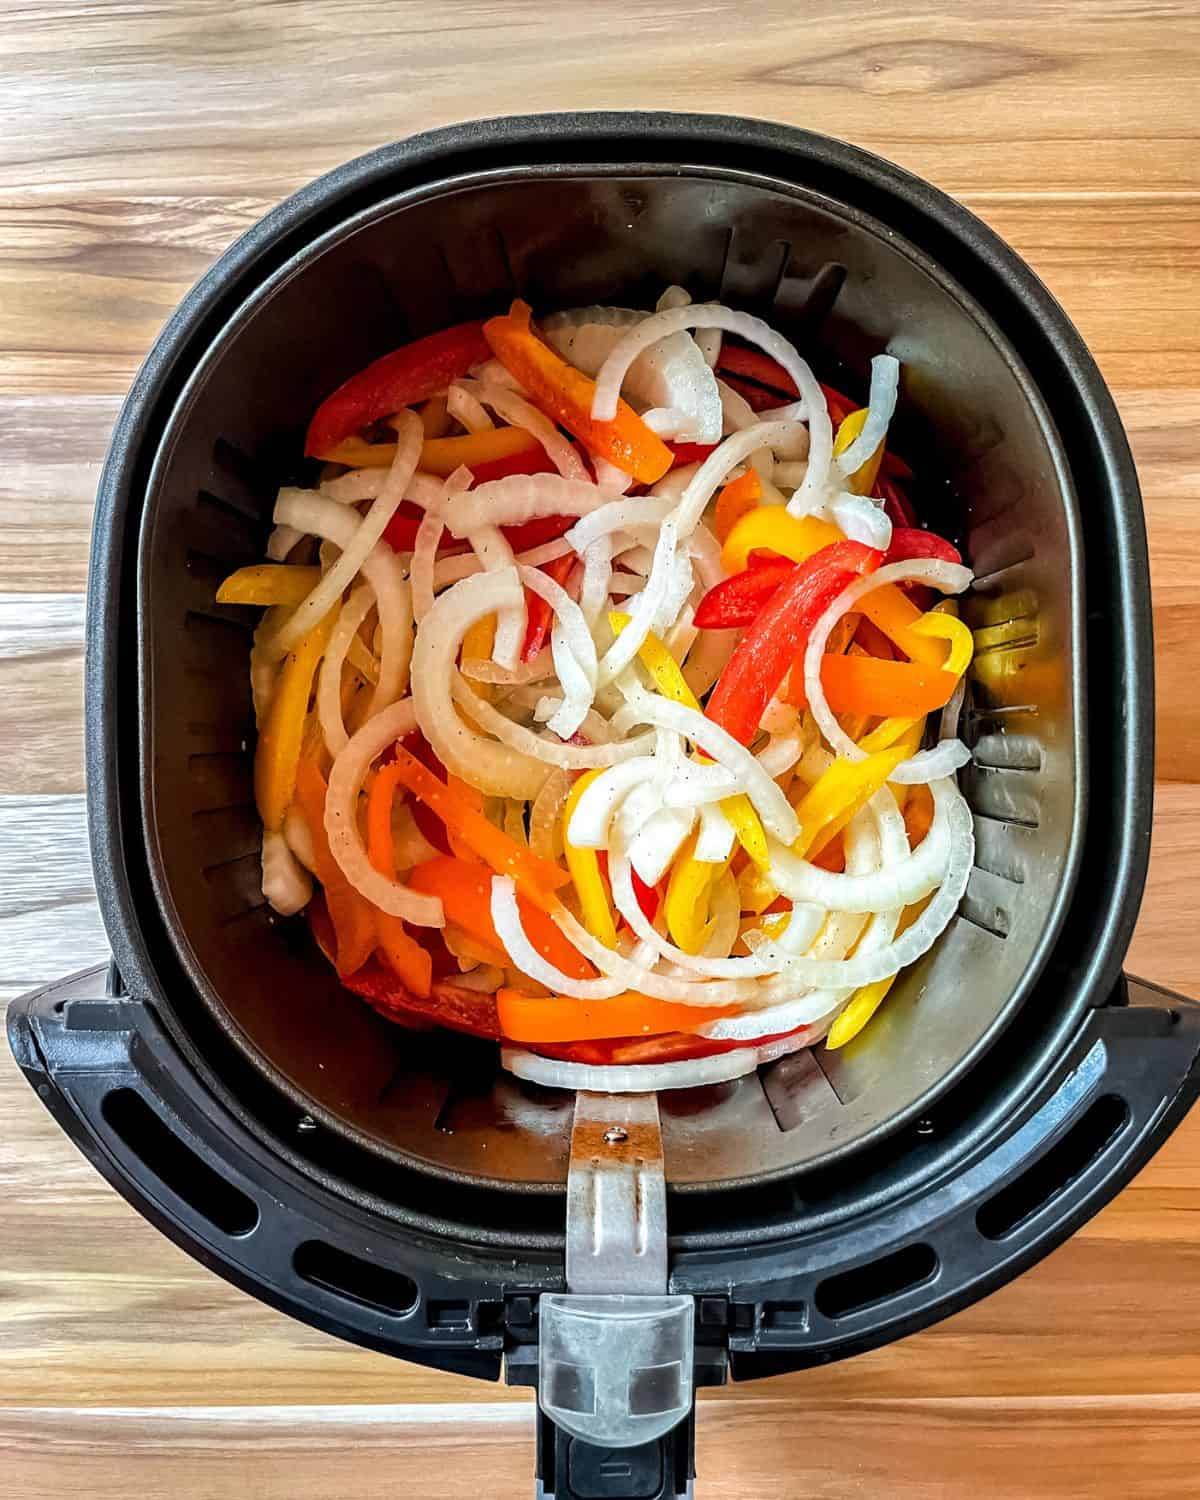 Sliced peppers and onions in the air fryer basket.